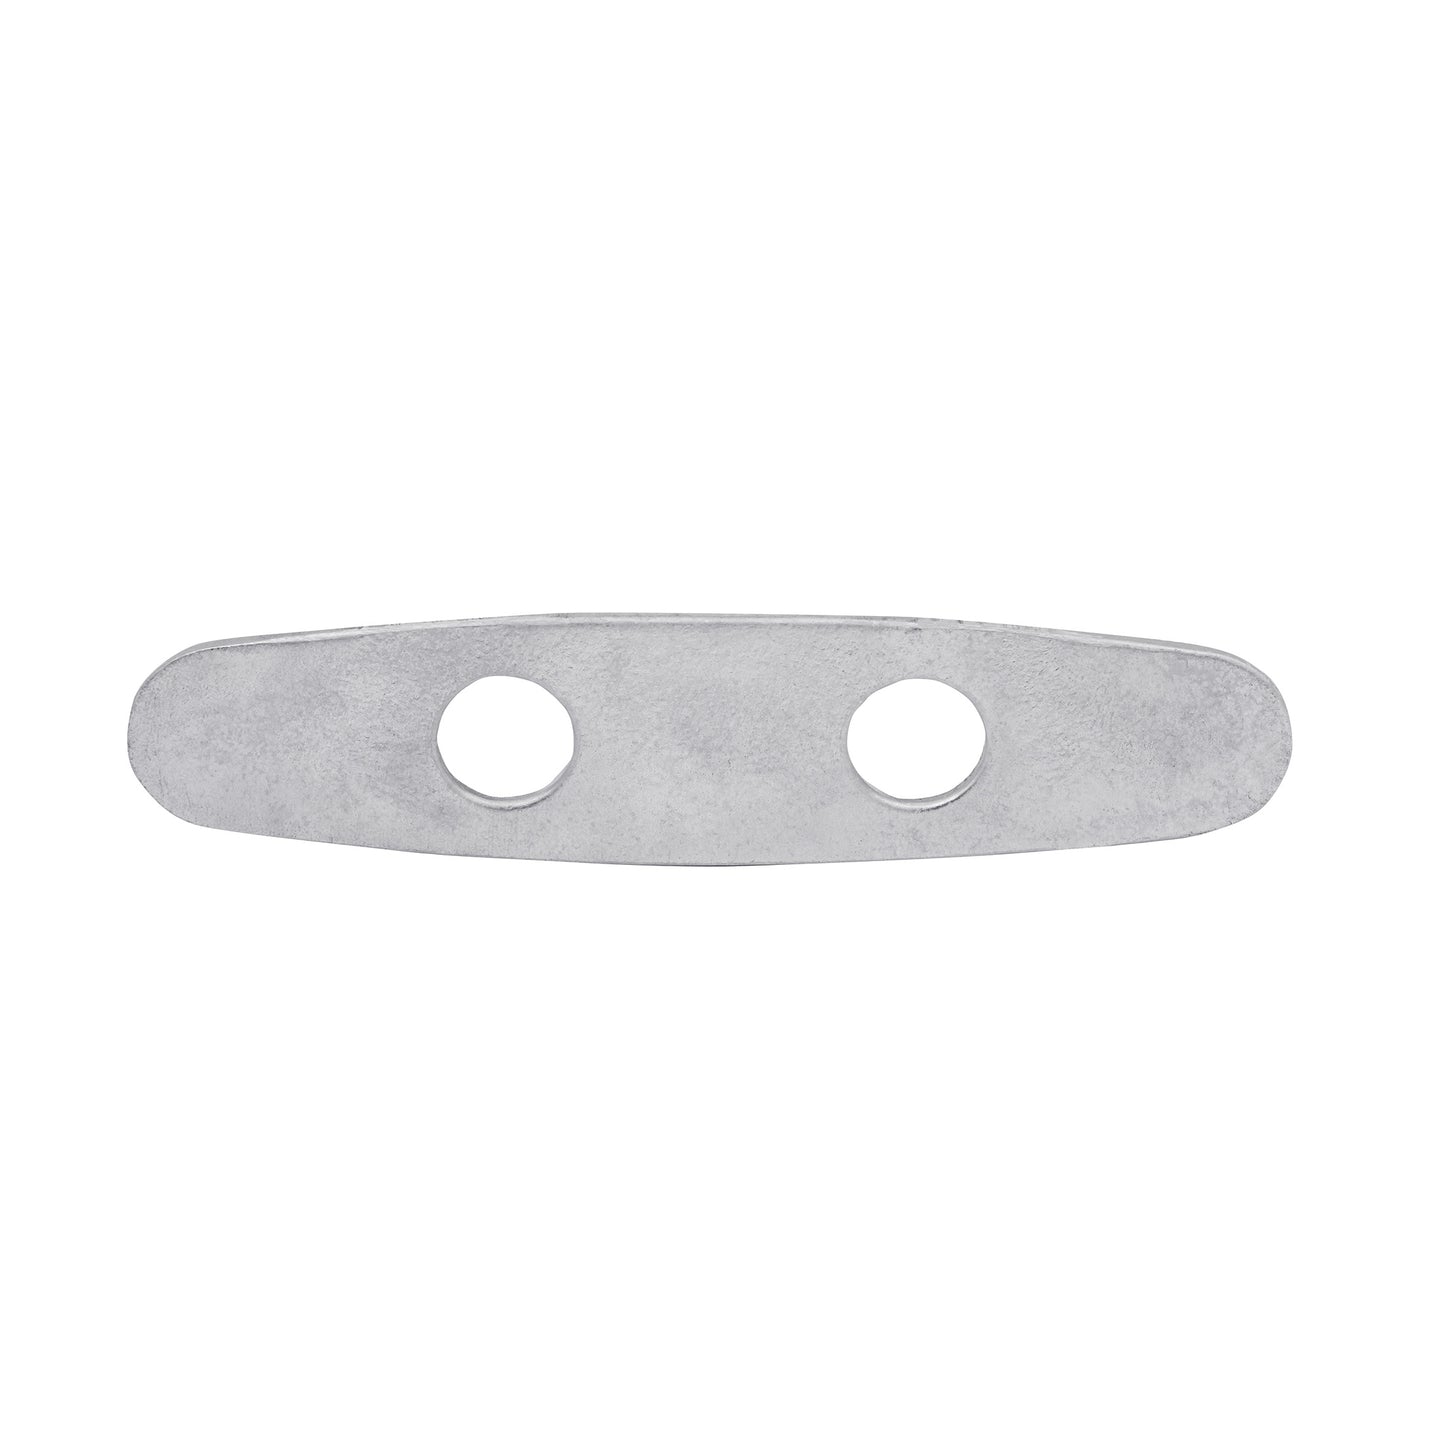 Backing Plate For 6" Pull Up Cleat - 7709BP